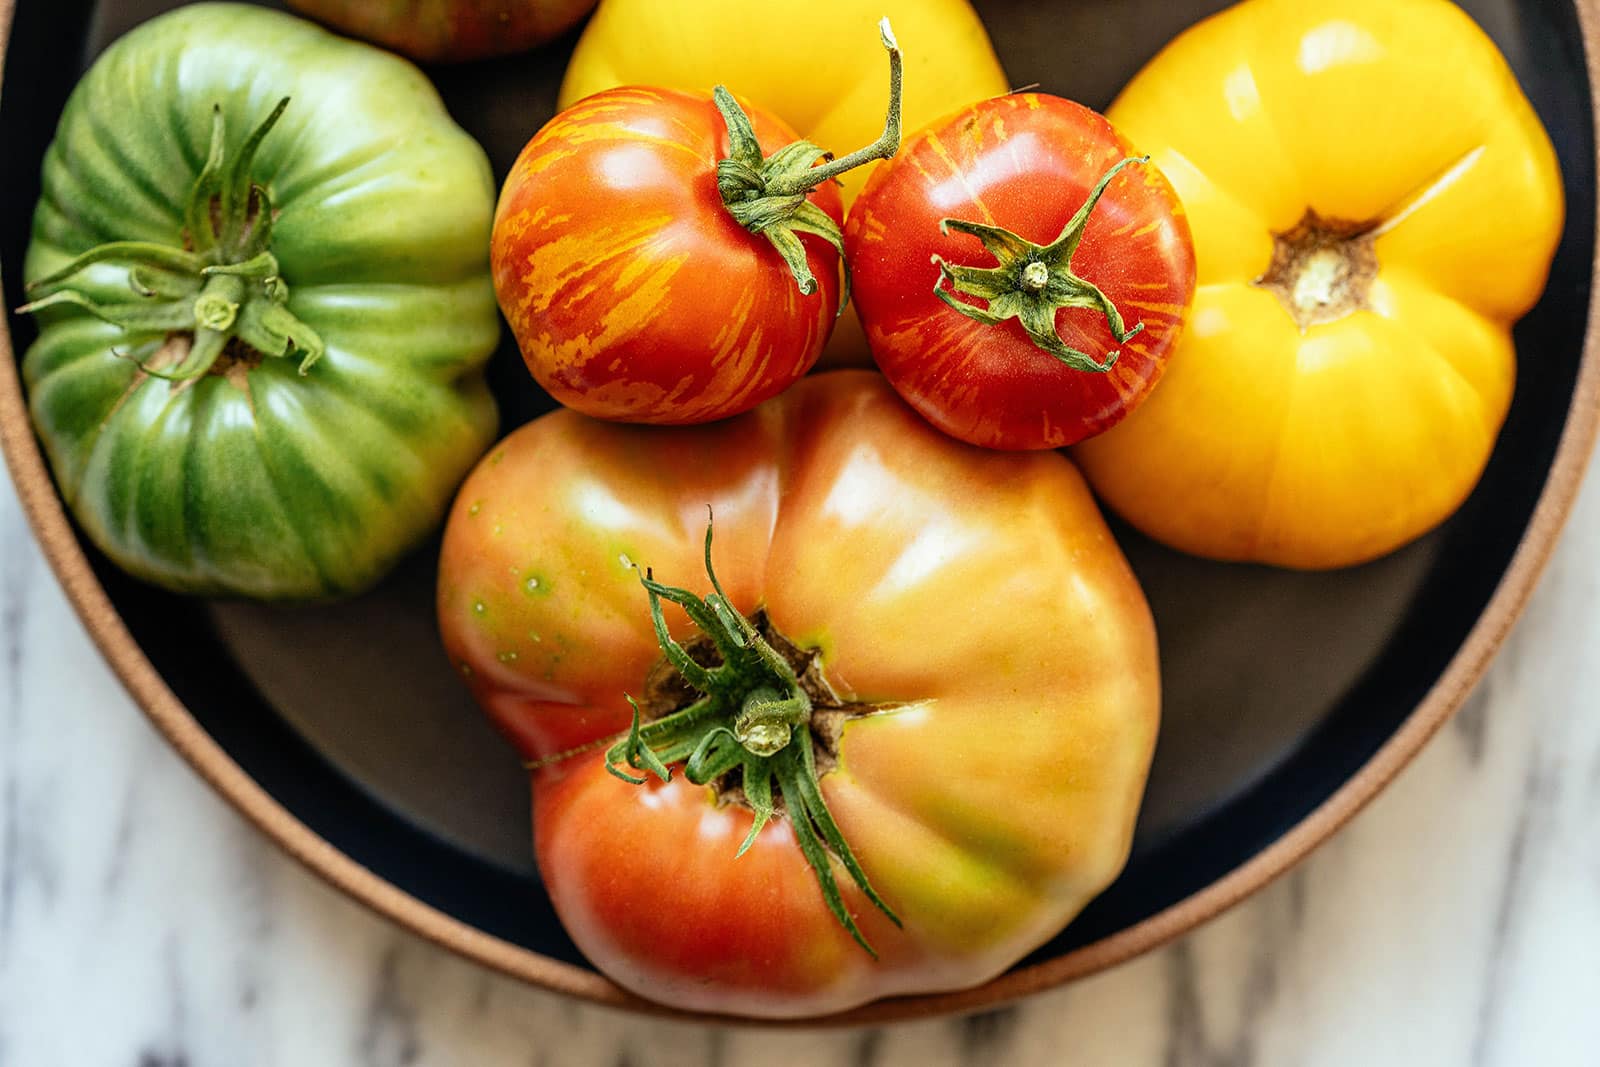 Colorful group of heirloom tomatoes ripening in a bowl on a marble counter